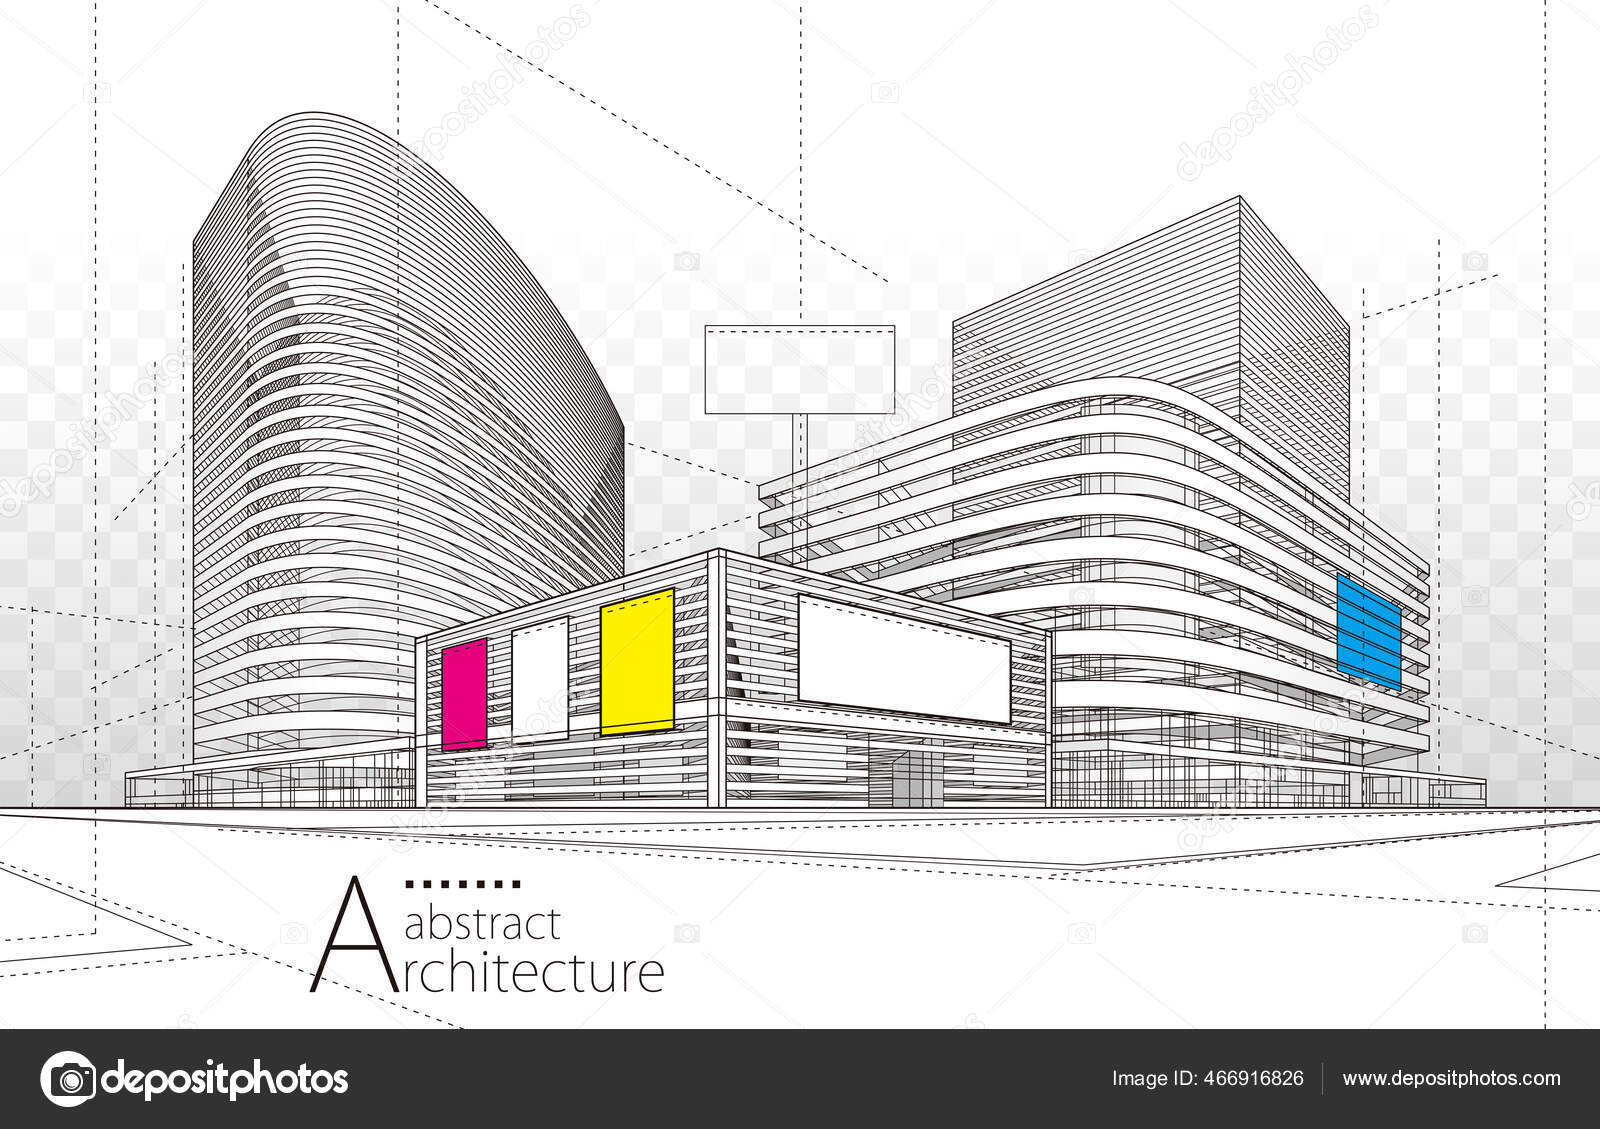 Modern Architecture-SketchUp - Architecture Sketches | Facebook